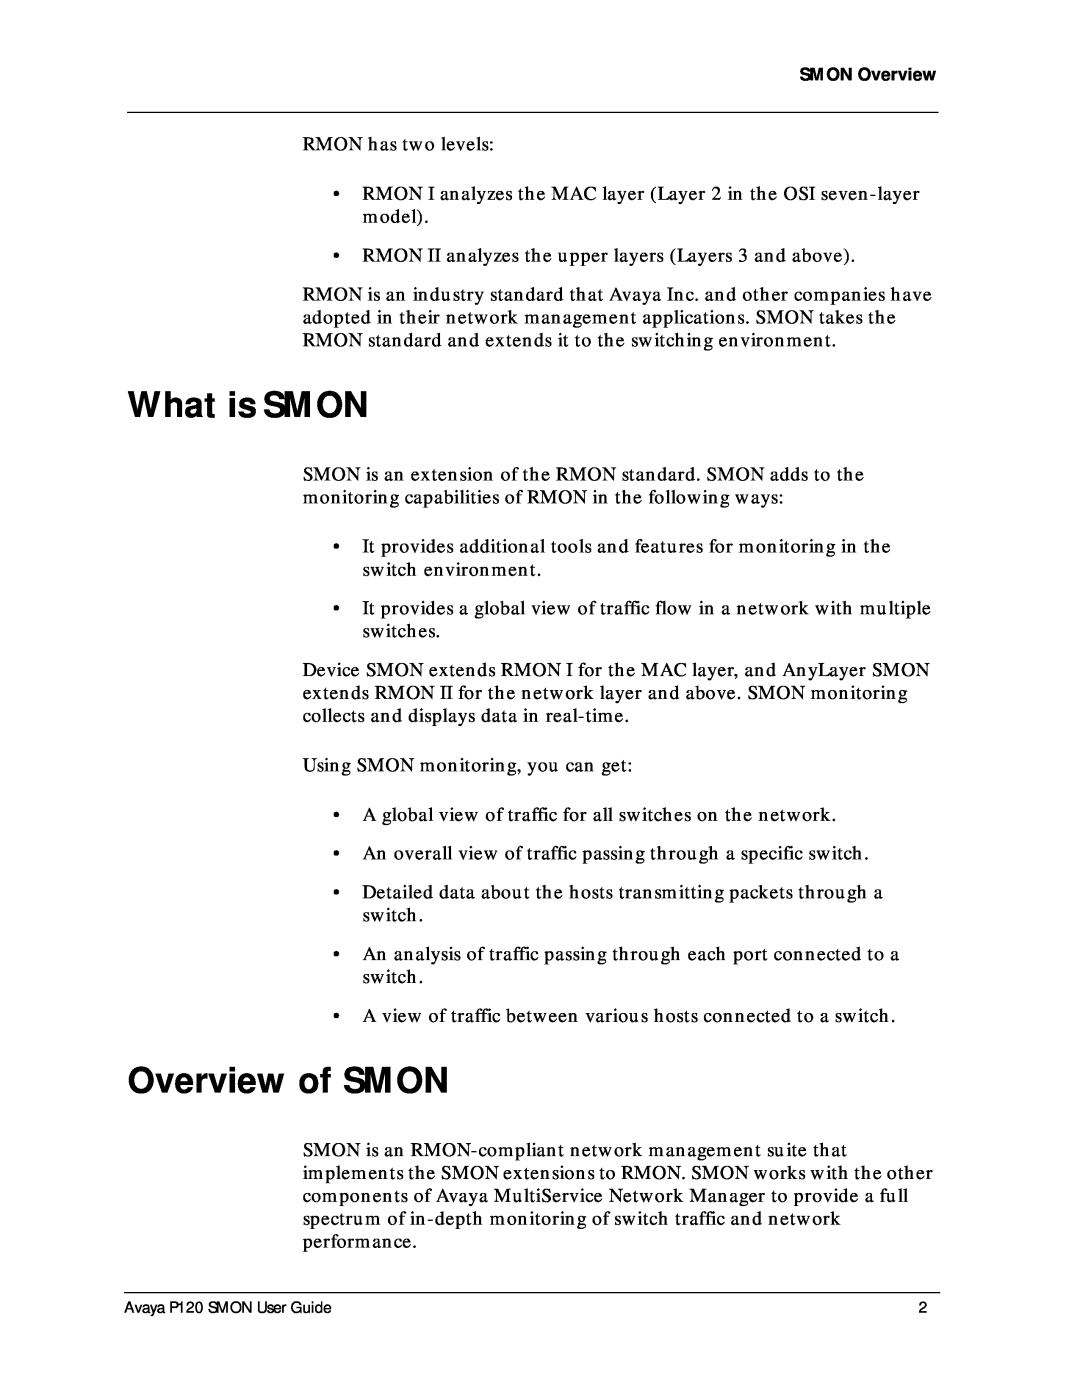 Avaya P120 SMON manual What is SMON, Overview of SMON 